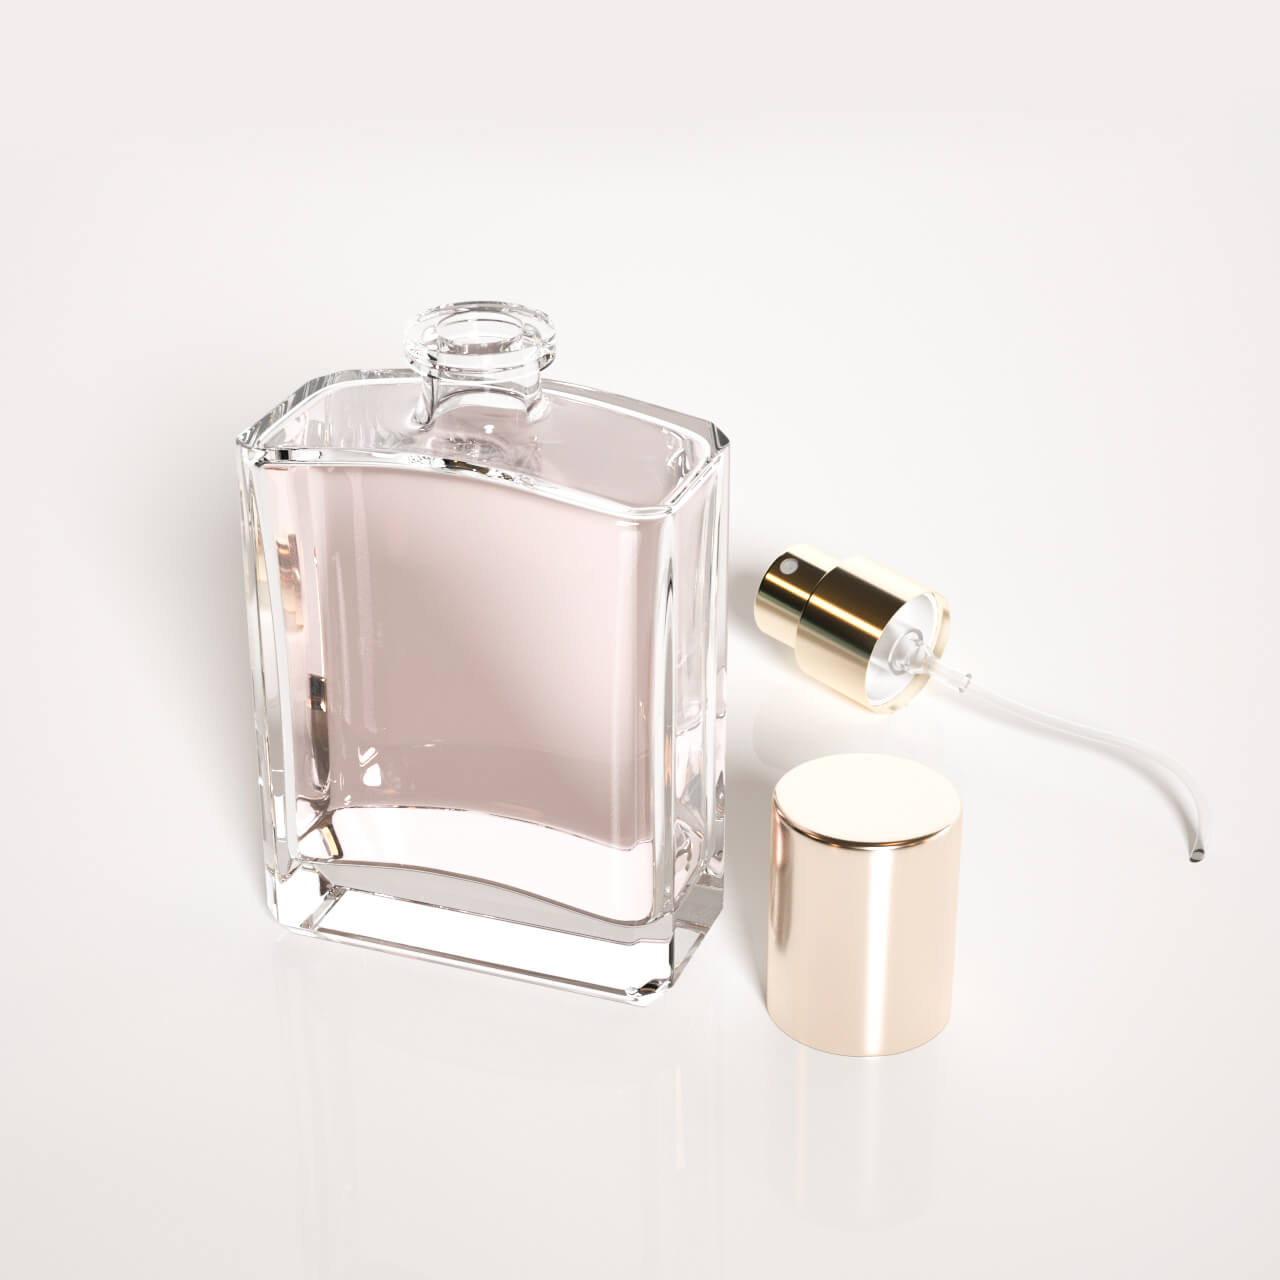 Curved perfume bottle (7)